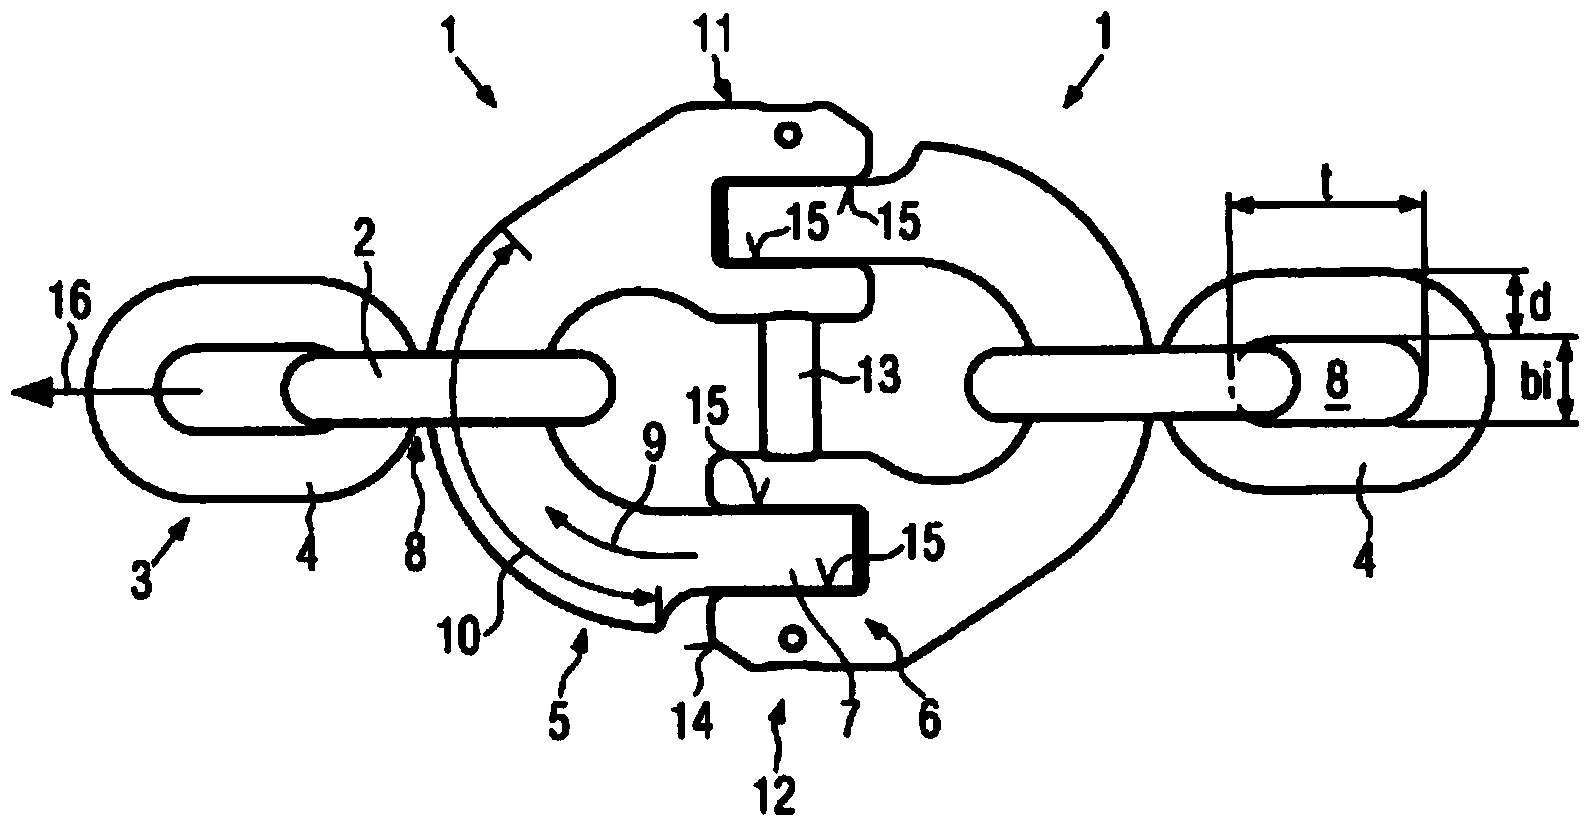 Device for attaching chain links